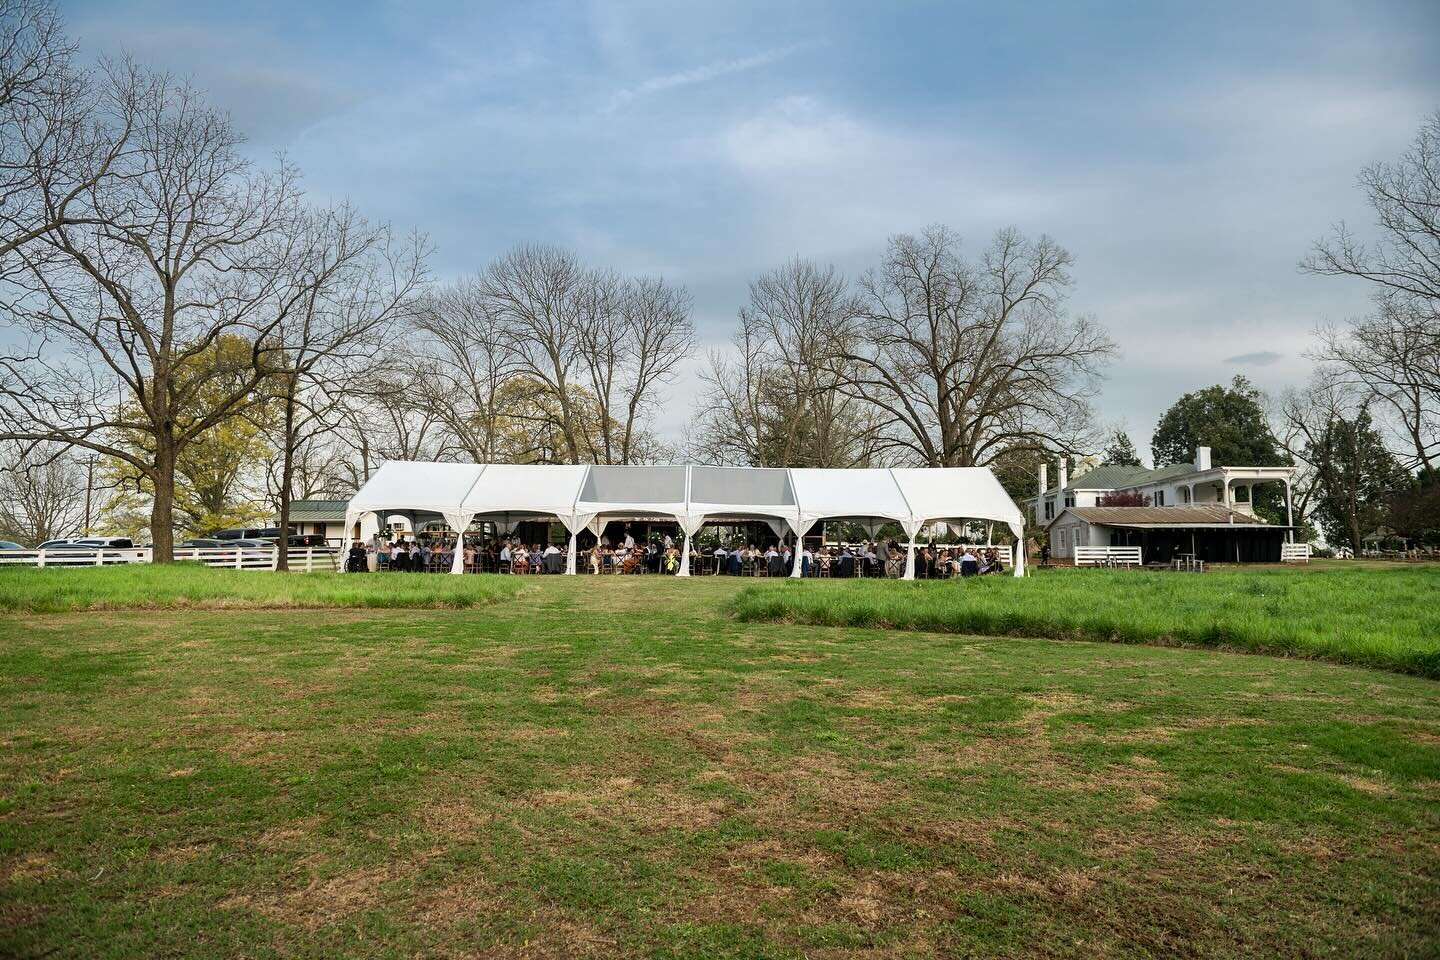 Spring looks good on the farm 🍀 
Come explore Cloverleaf Farm, a stunning, vast venue tucked away just outside of Athens, GA. Whether it&rsquo;s a wedding, social event, or corporate retreat, our experienced catering and event staff knows how to pla